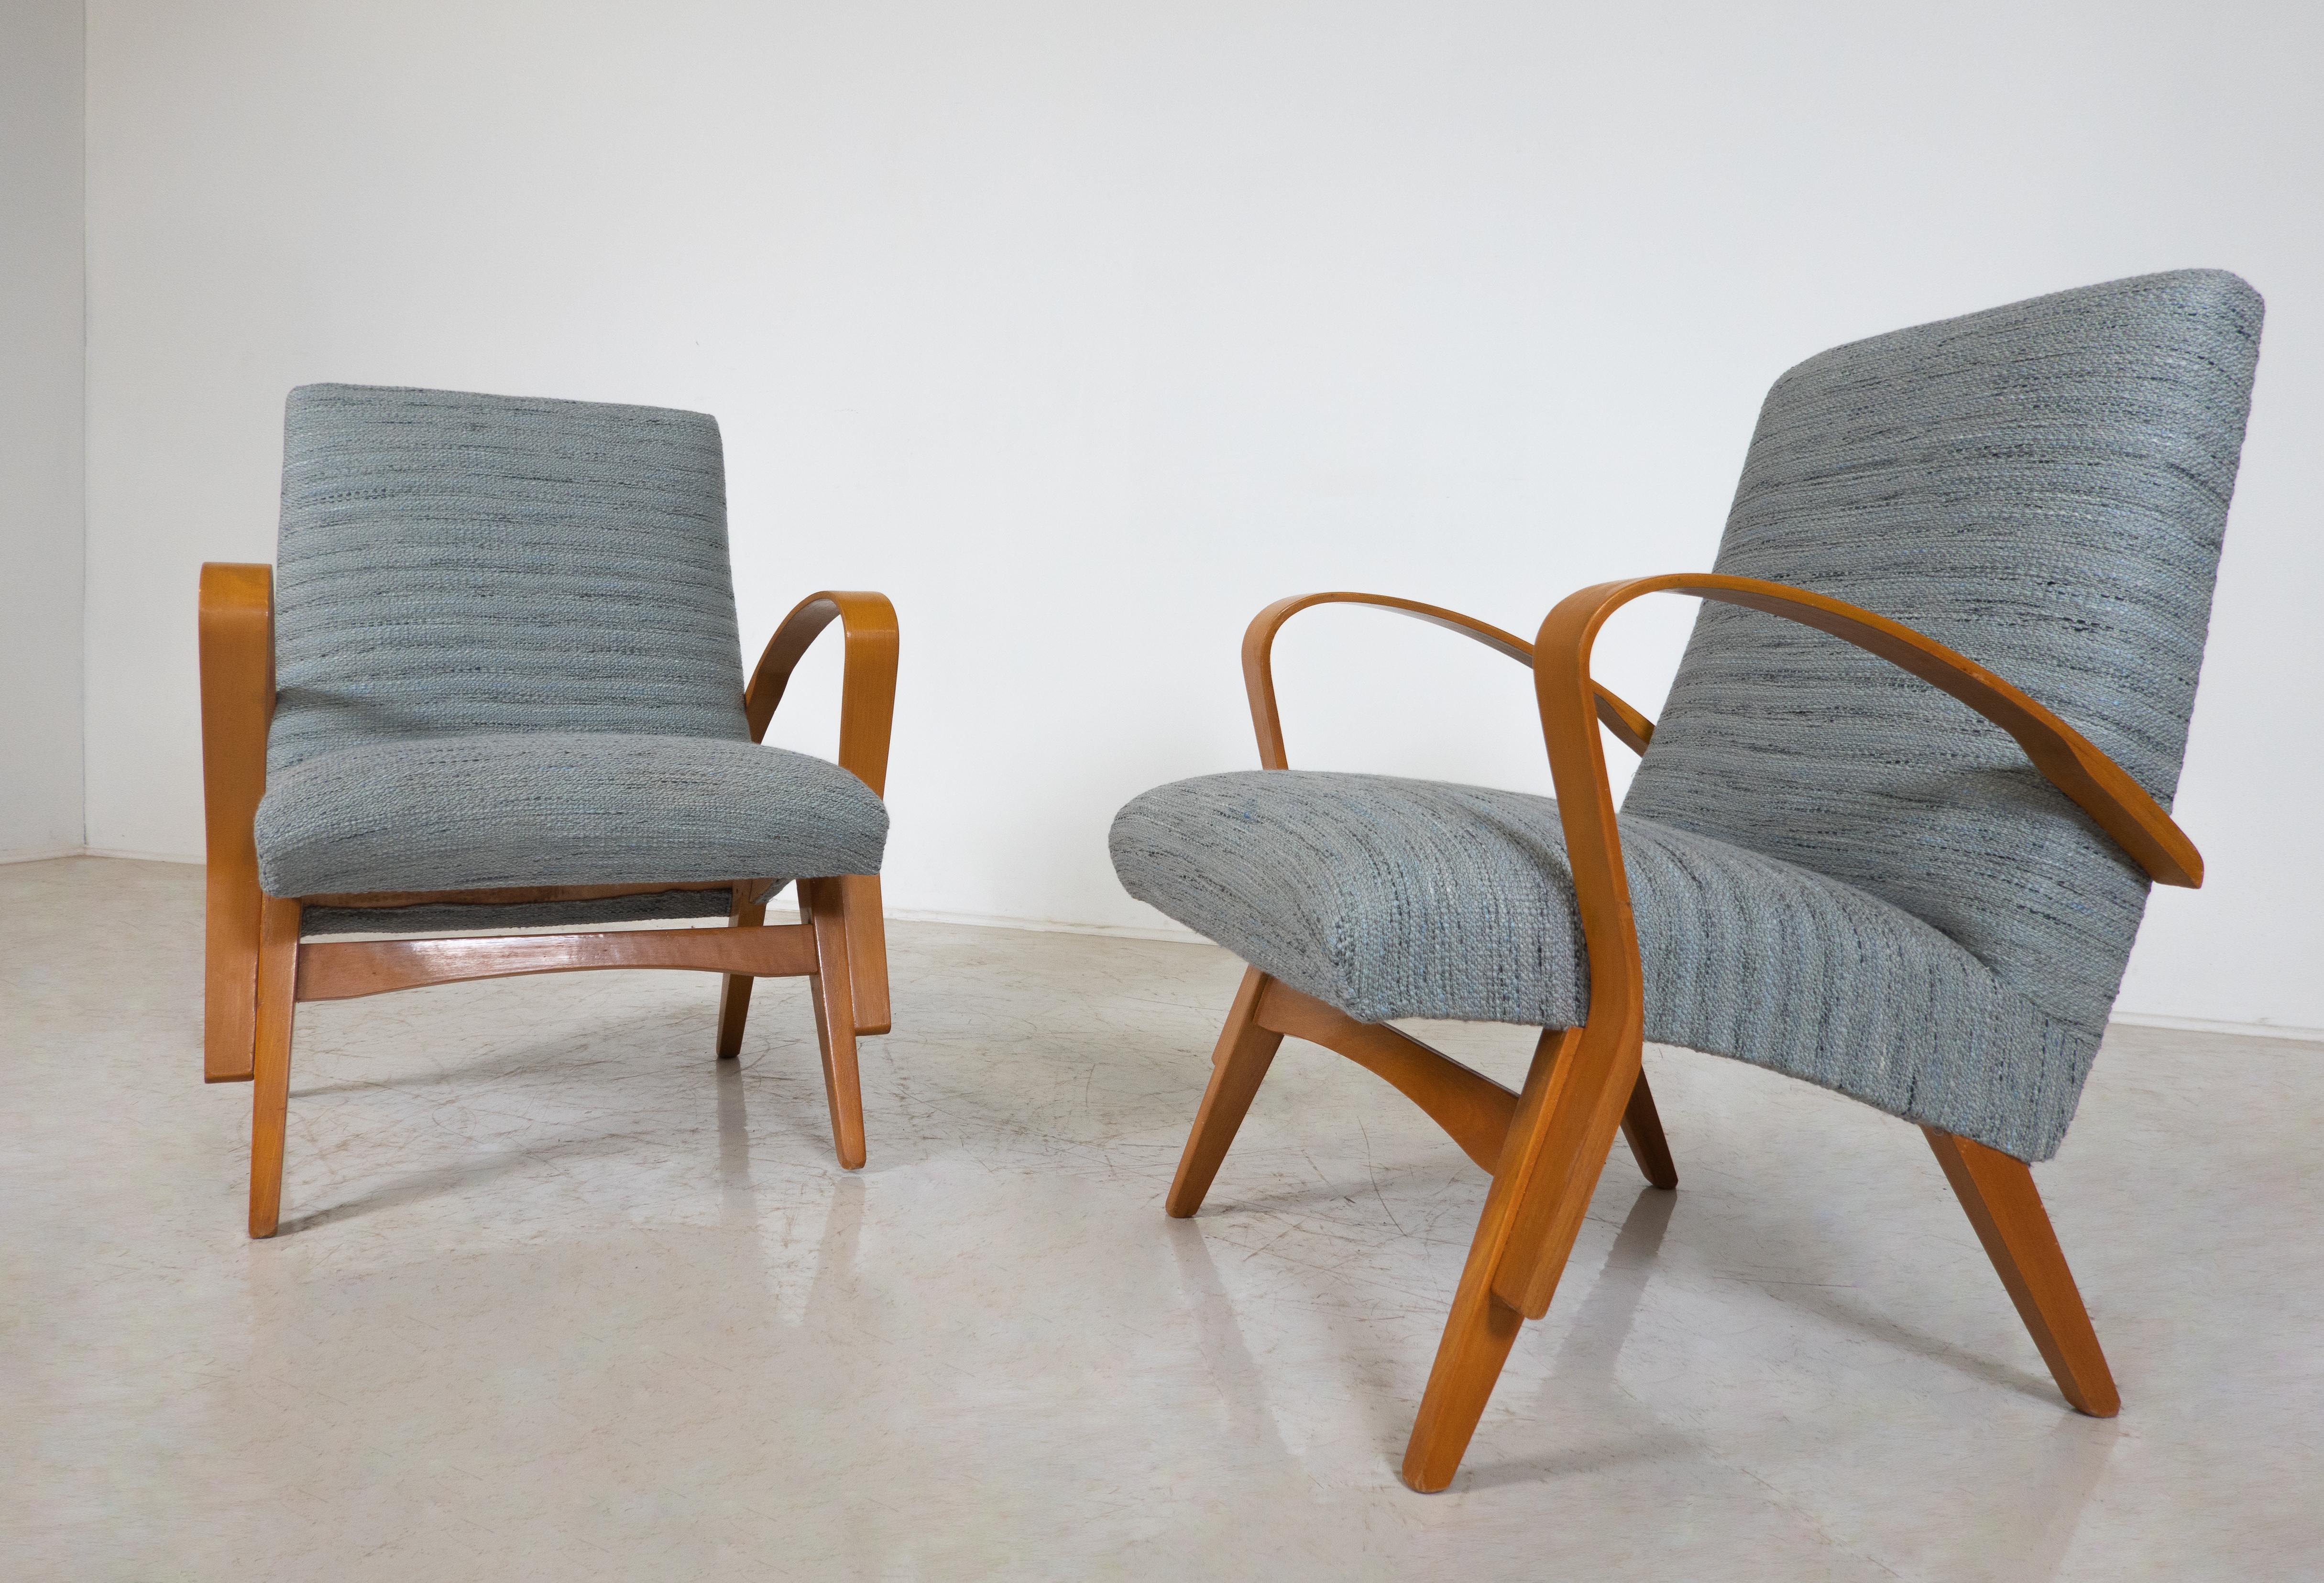 Mid-Century Modern Pair of Armchairs, 1950s, Czech Republic (New Uphostery) In Good Condition For Sale In Brussels, BE